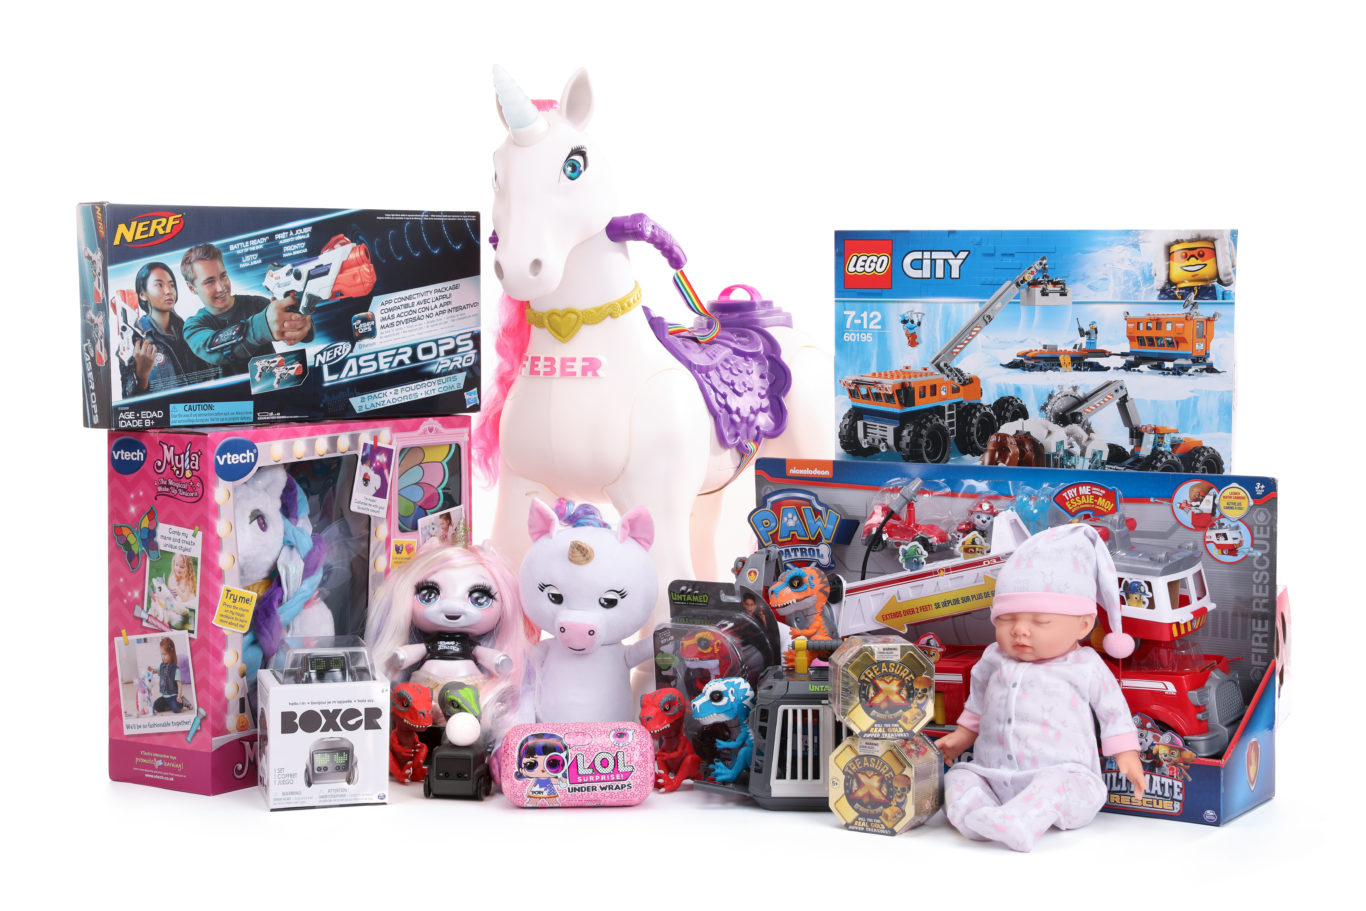 The musthave toys for Christmas revealed and dominated by unicorns